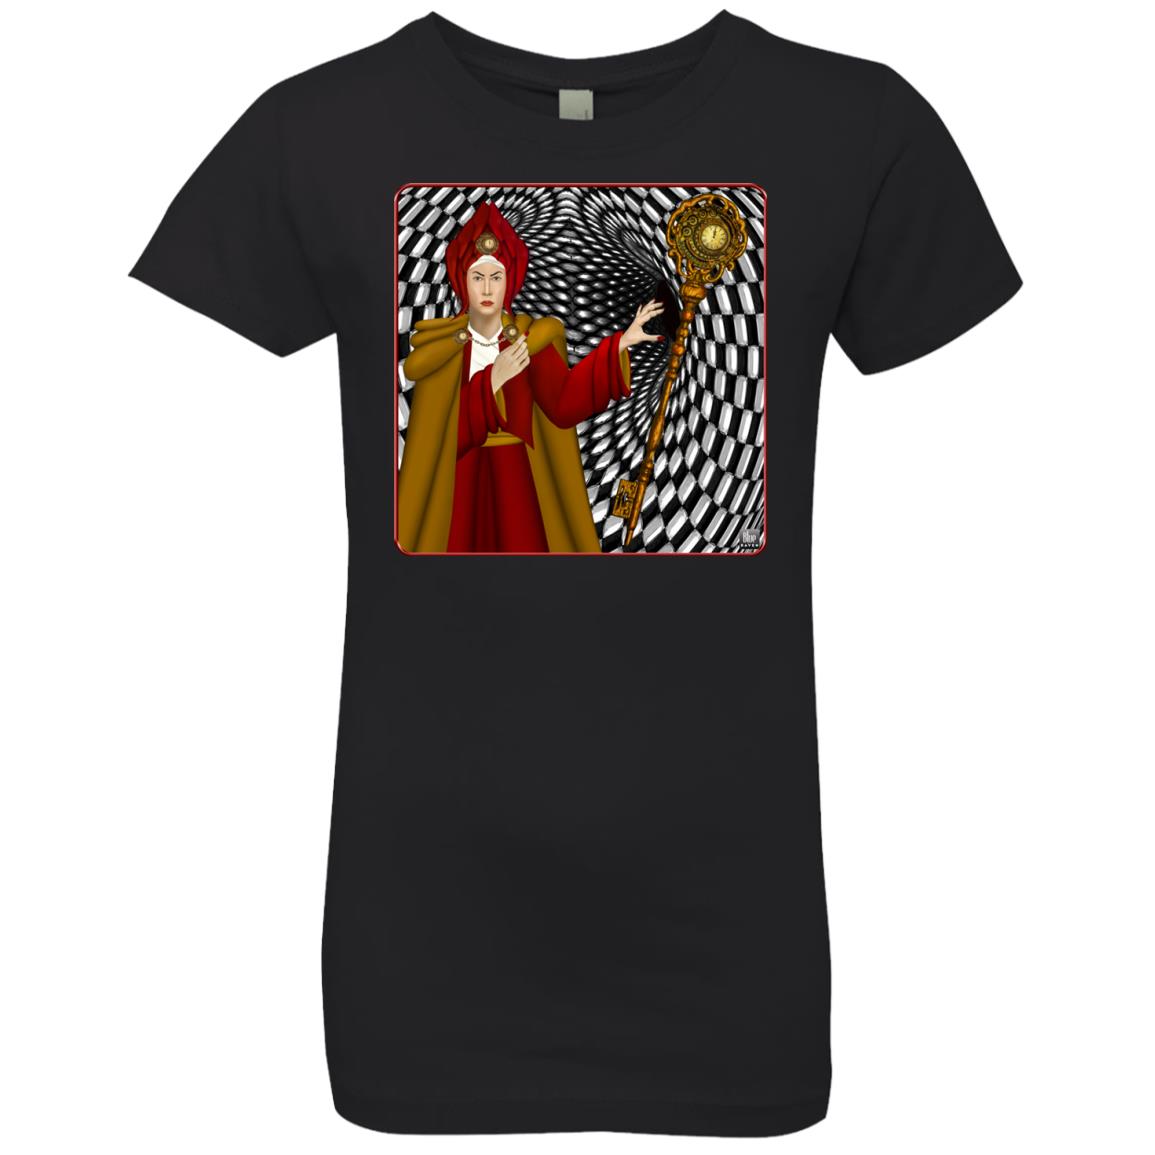 PORTRAIT OF THE RED QUEEN - Girl's Premium Cotton T-Shirt